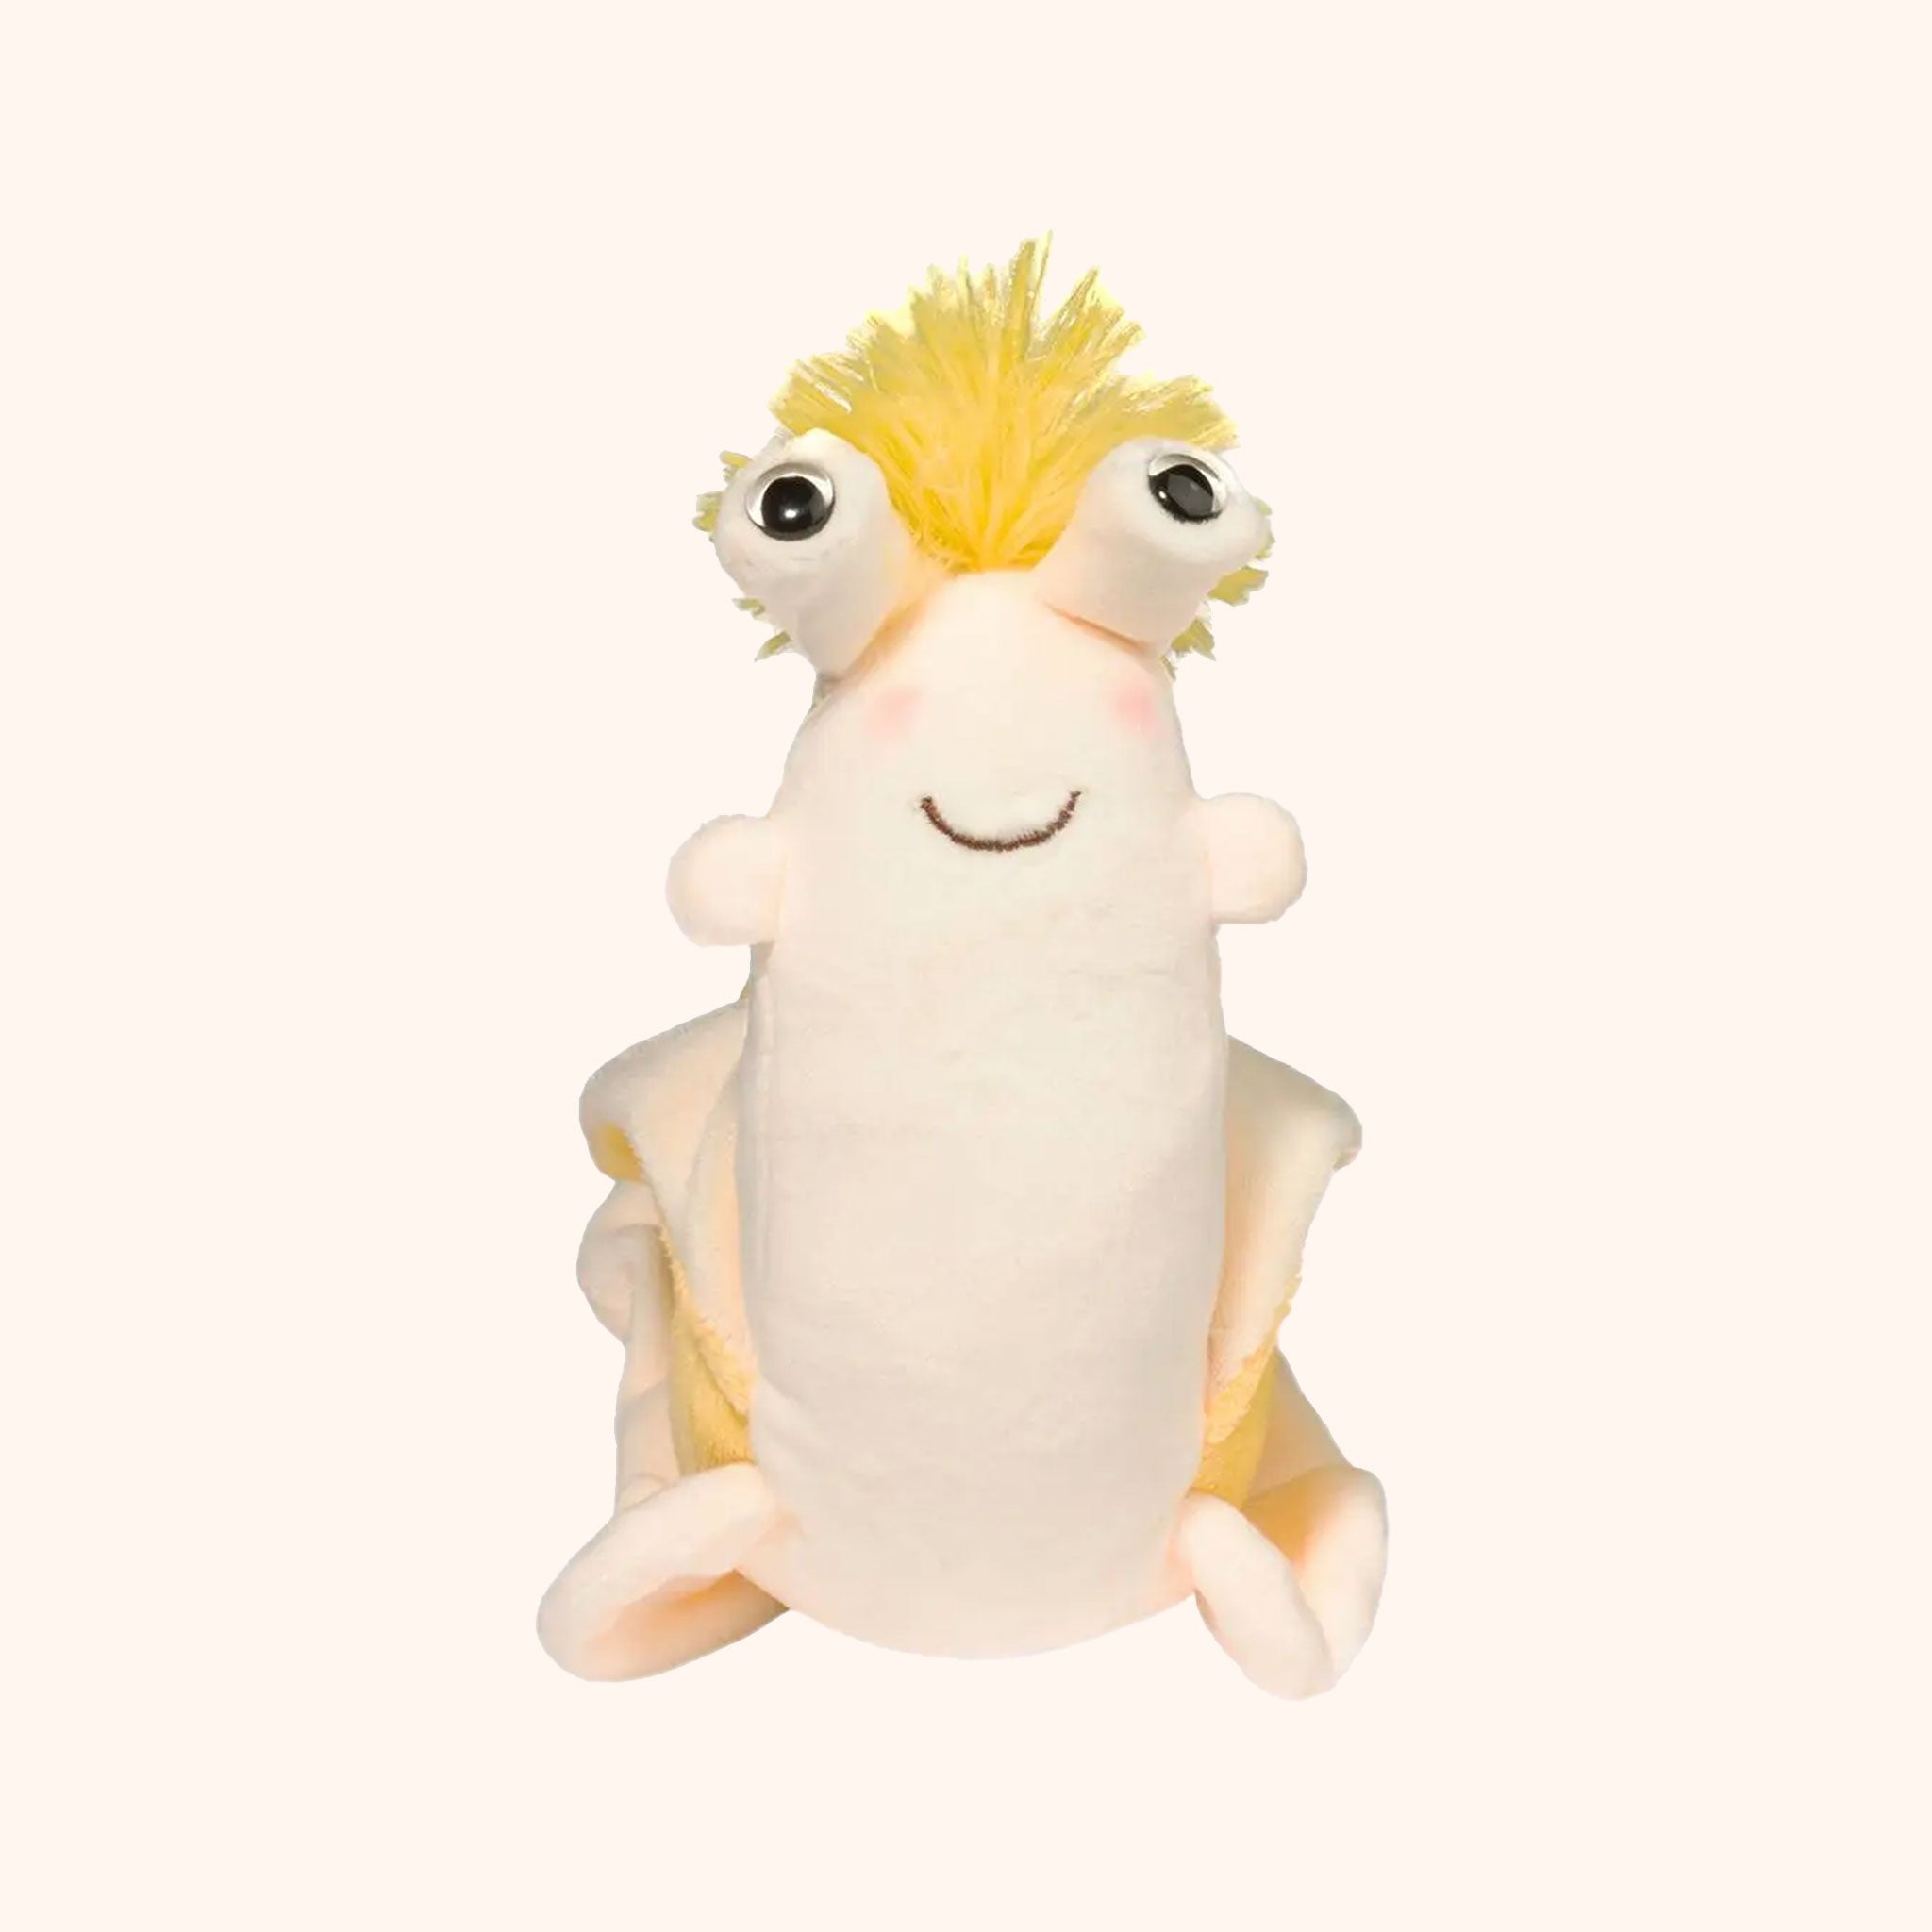 On a tan background is an ivory and bright yellow banana slug shaped stuffed animal toy with bulging eyes, a fluffy yellow pom on the top of its head. The back of its body is shaped like a banana peel.